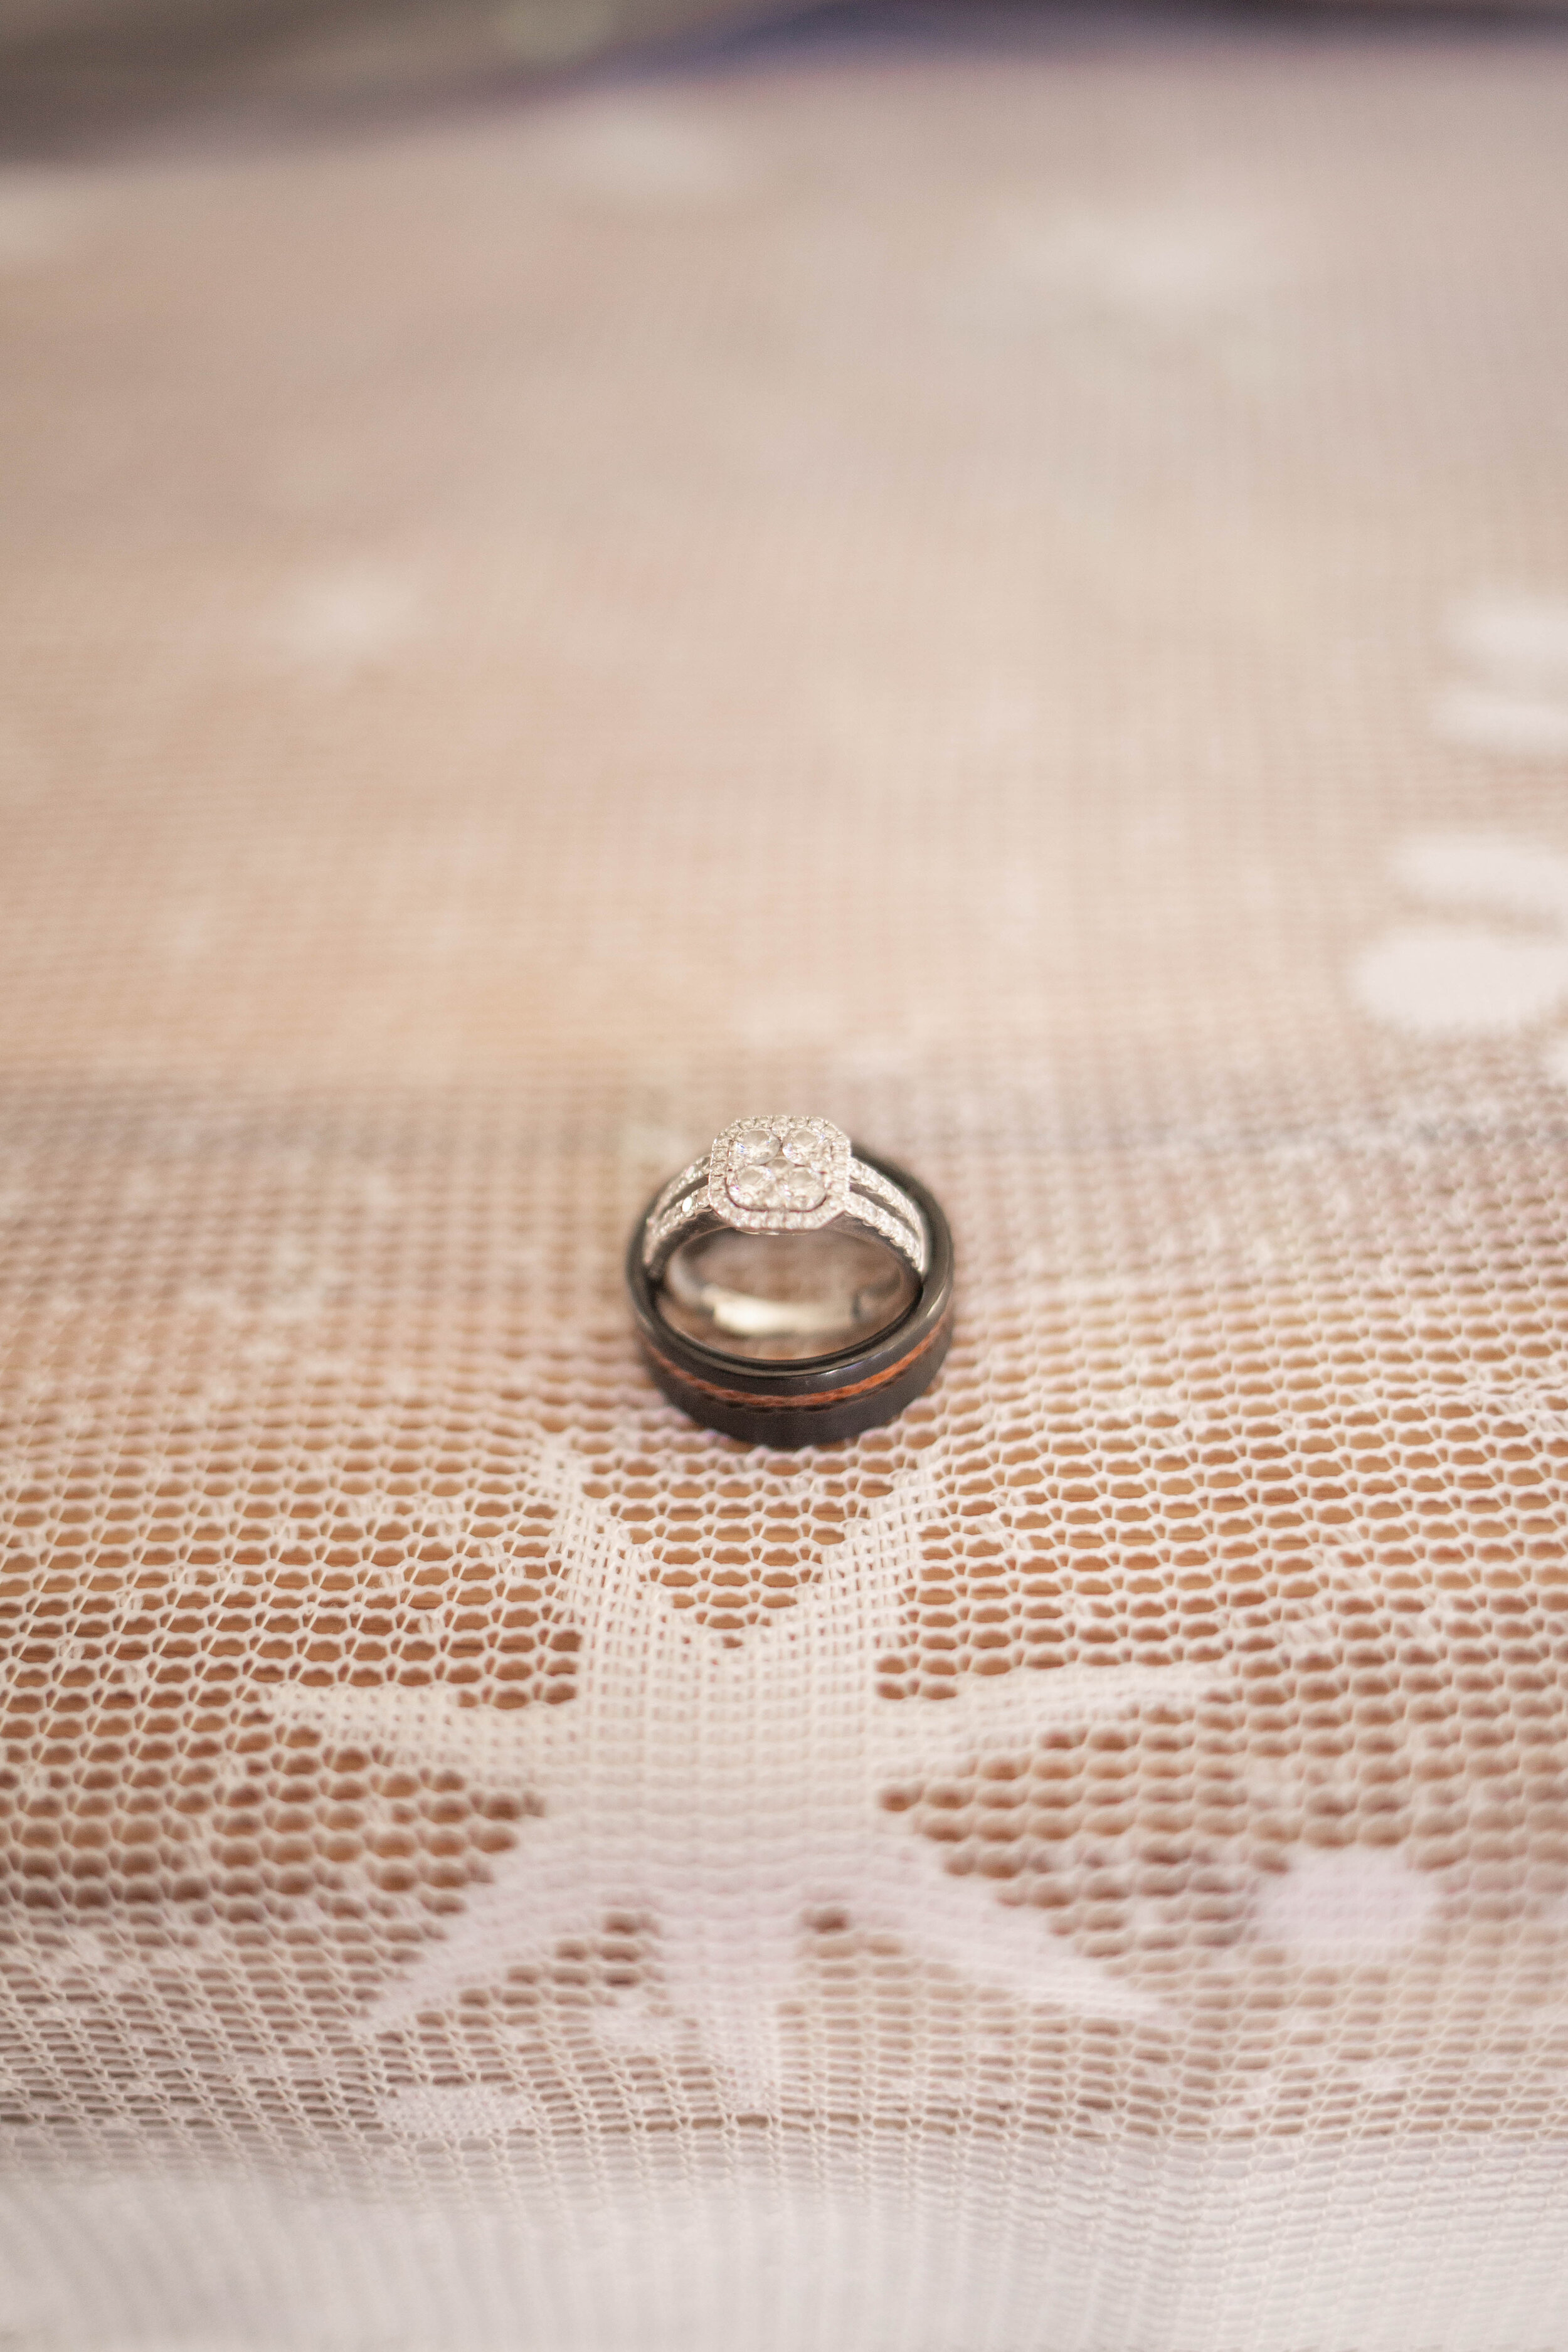 Winter wedding details with his and hers wedding rings 